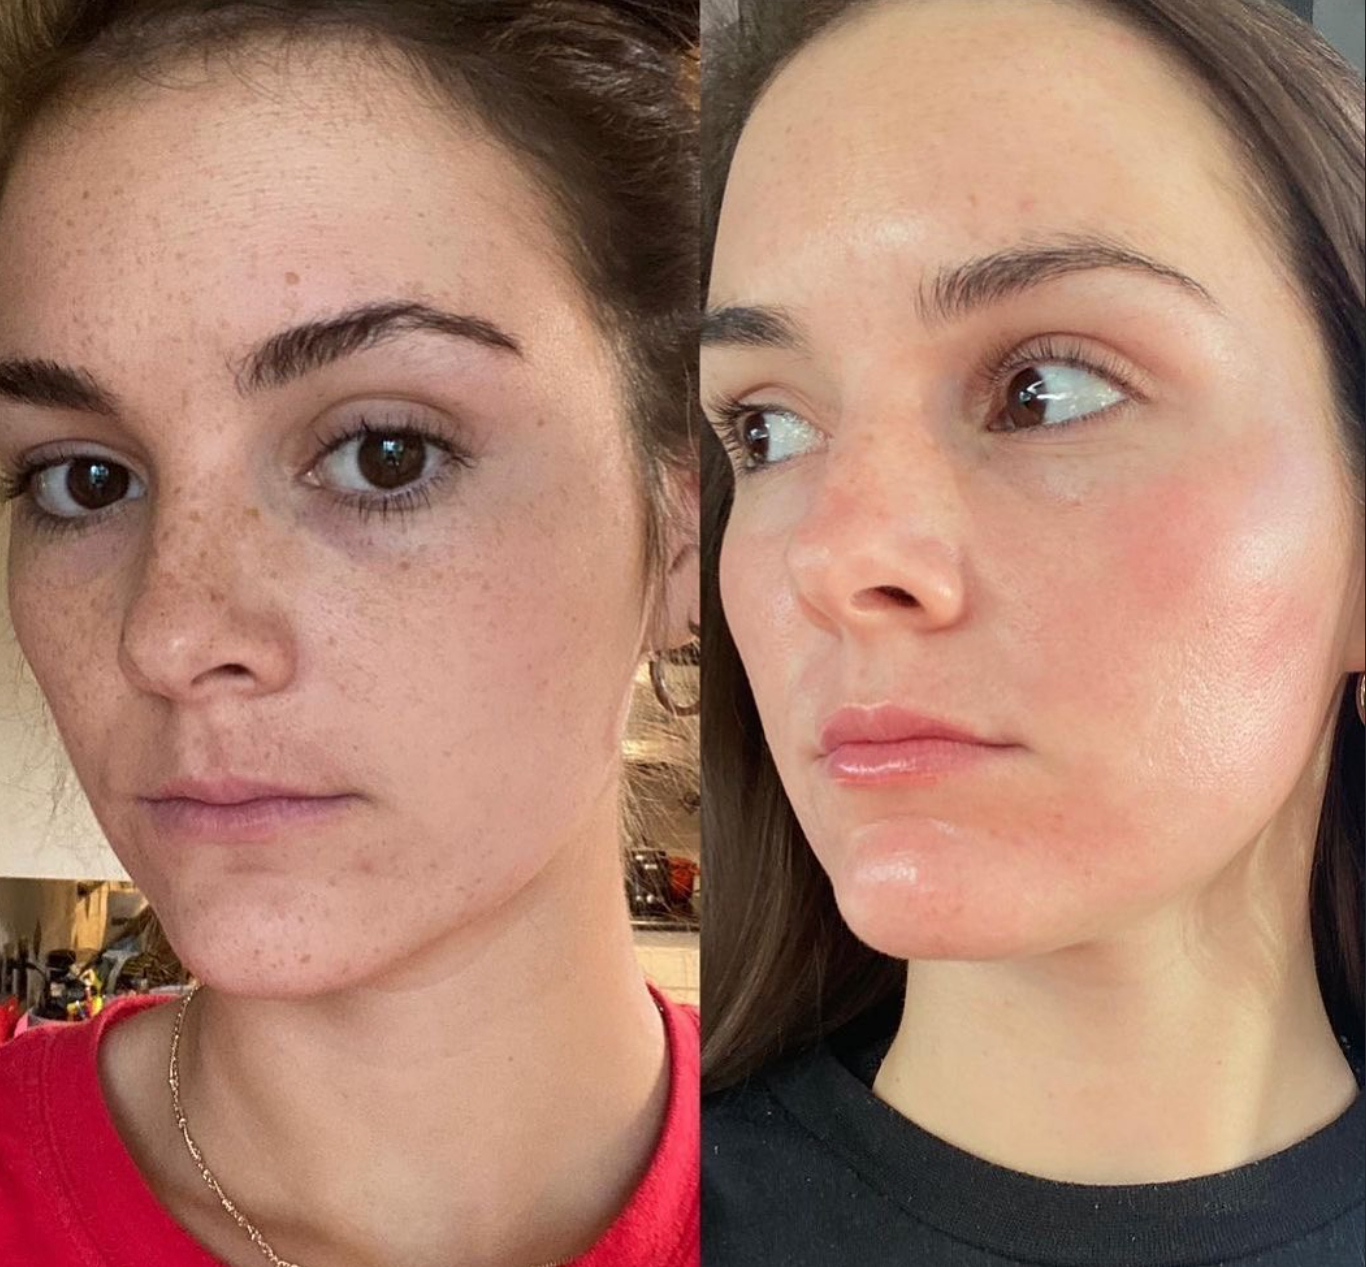 Reveskin Revepeel smooth, reduced hyperpigmentation before and after